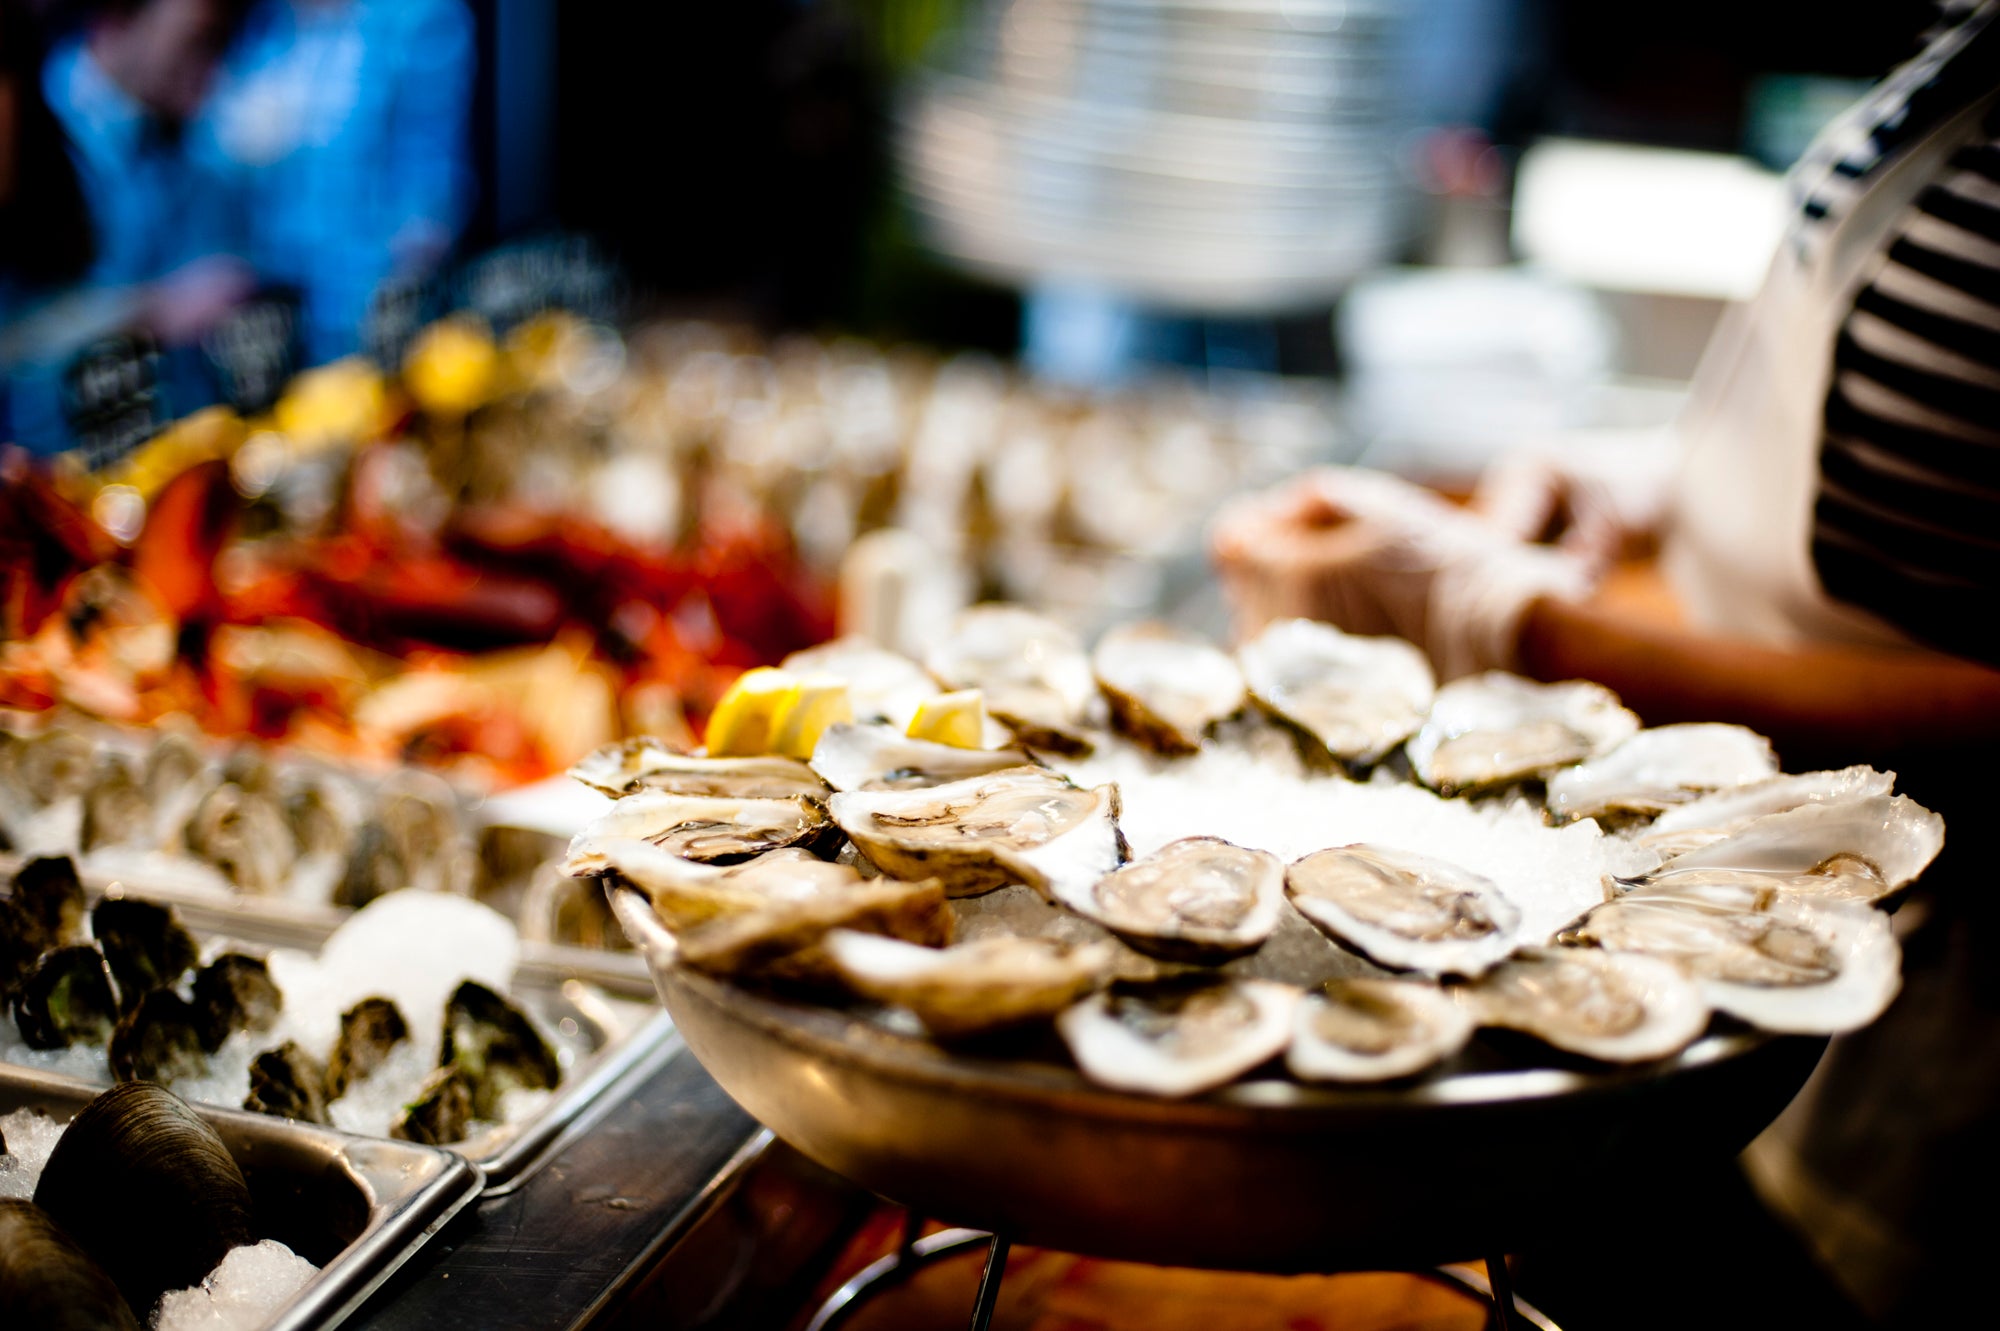 Oysters and more from the raw bar at Neptune.